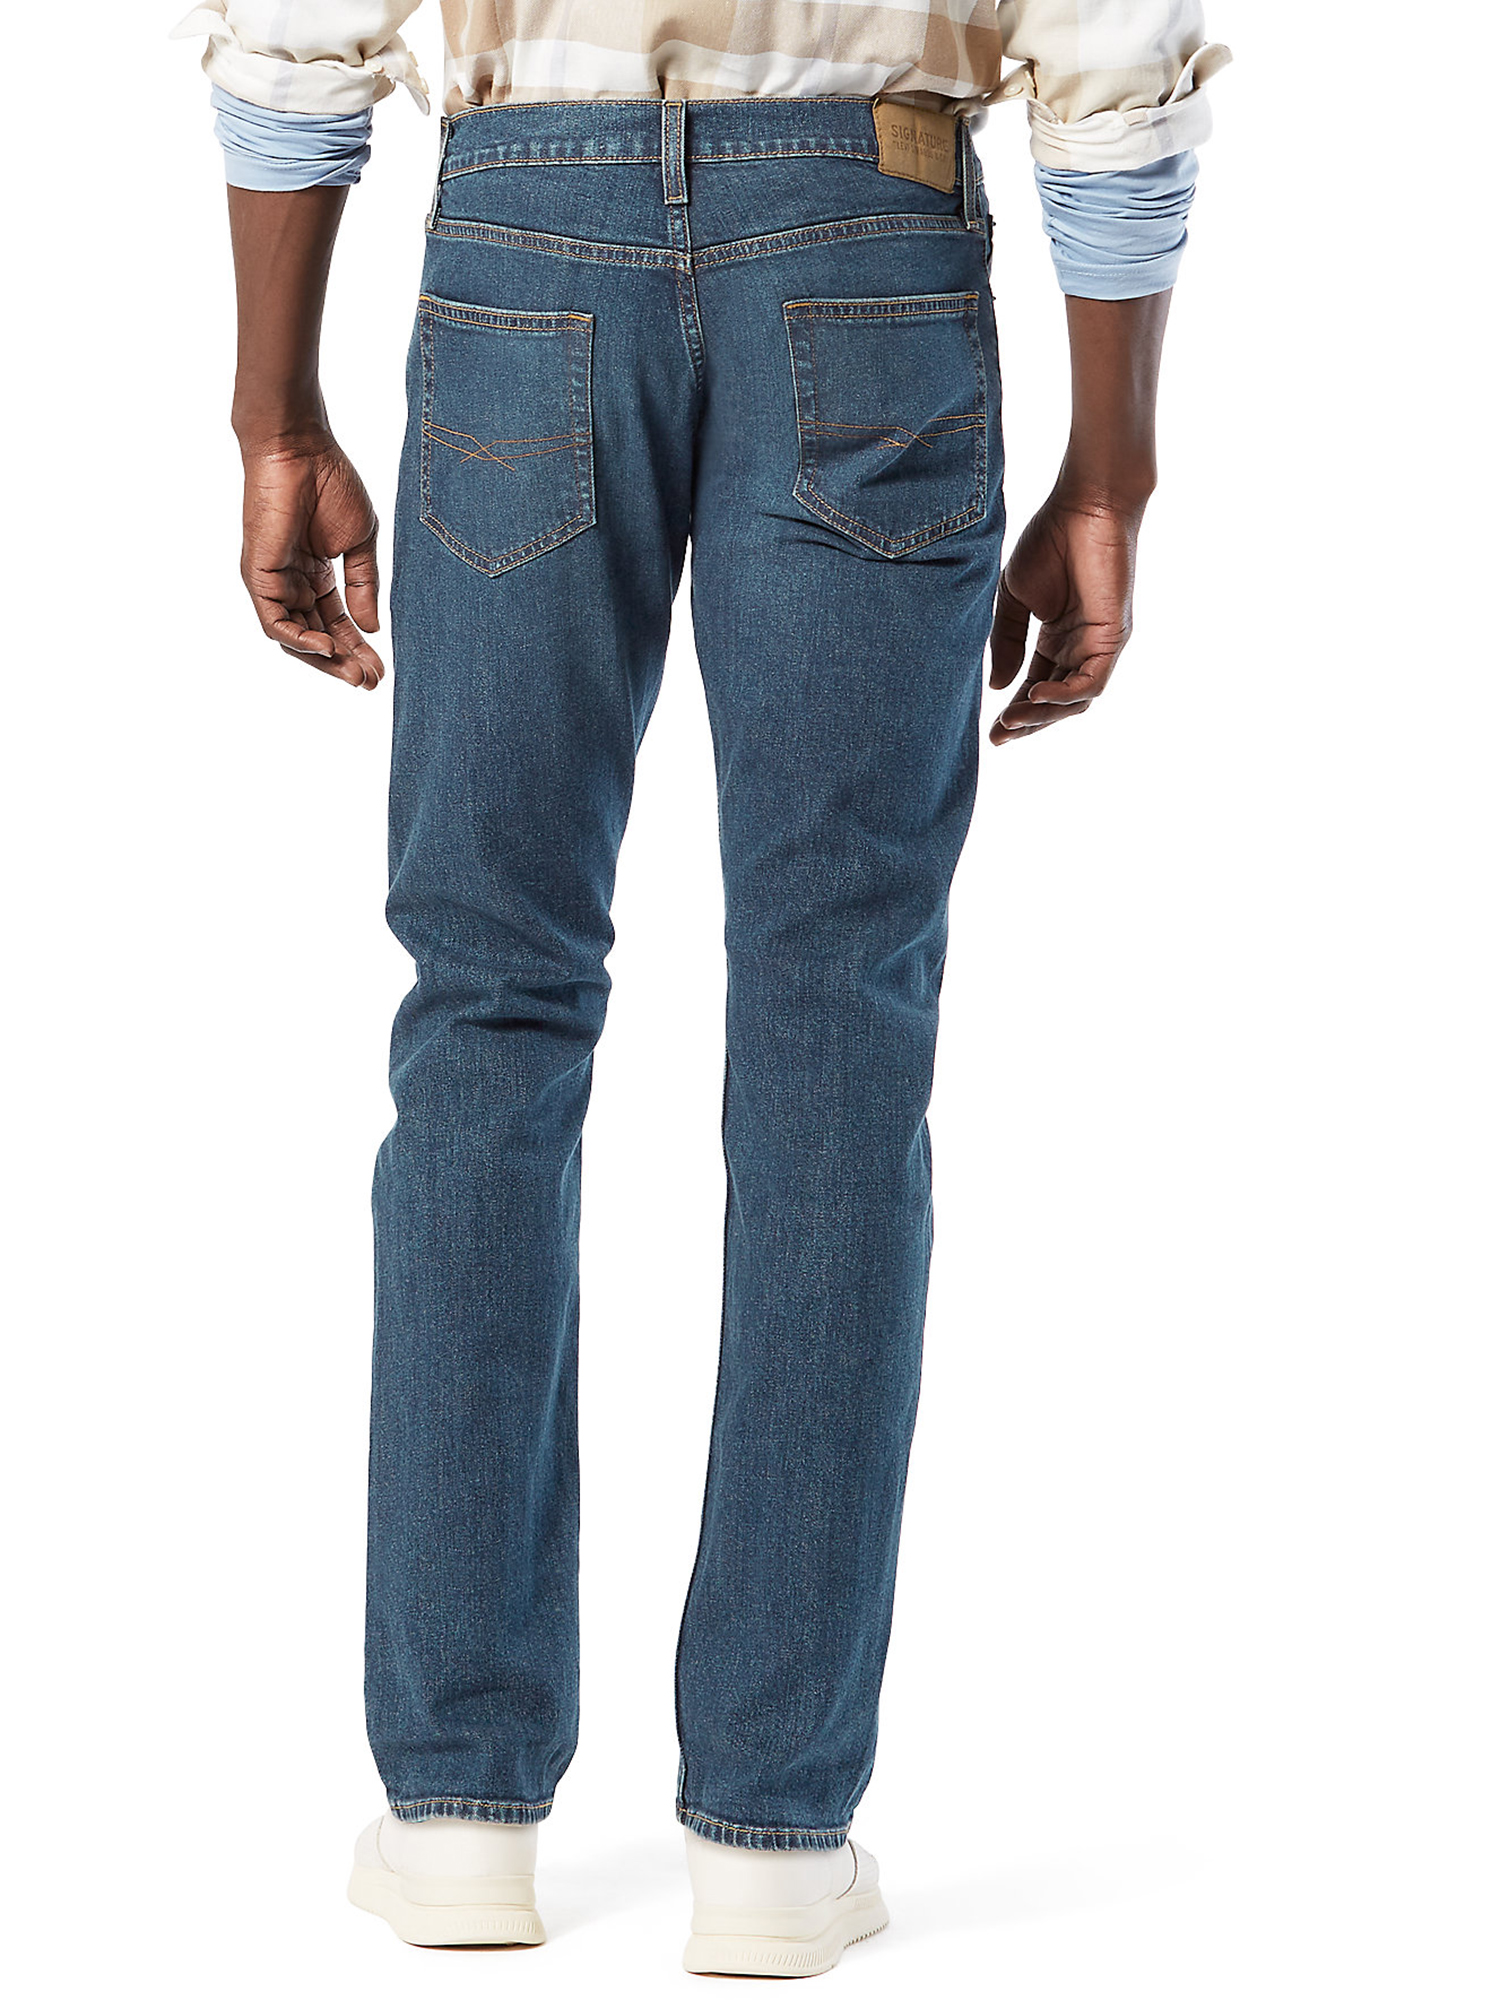 Signature By Levi Strauss & Co. Men's Straight Fit Jeans - image 4 of 5